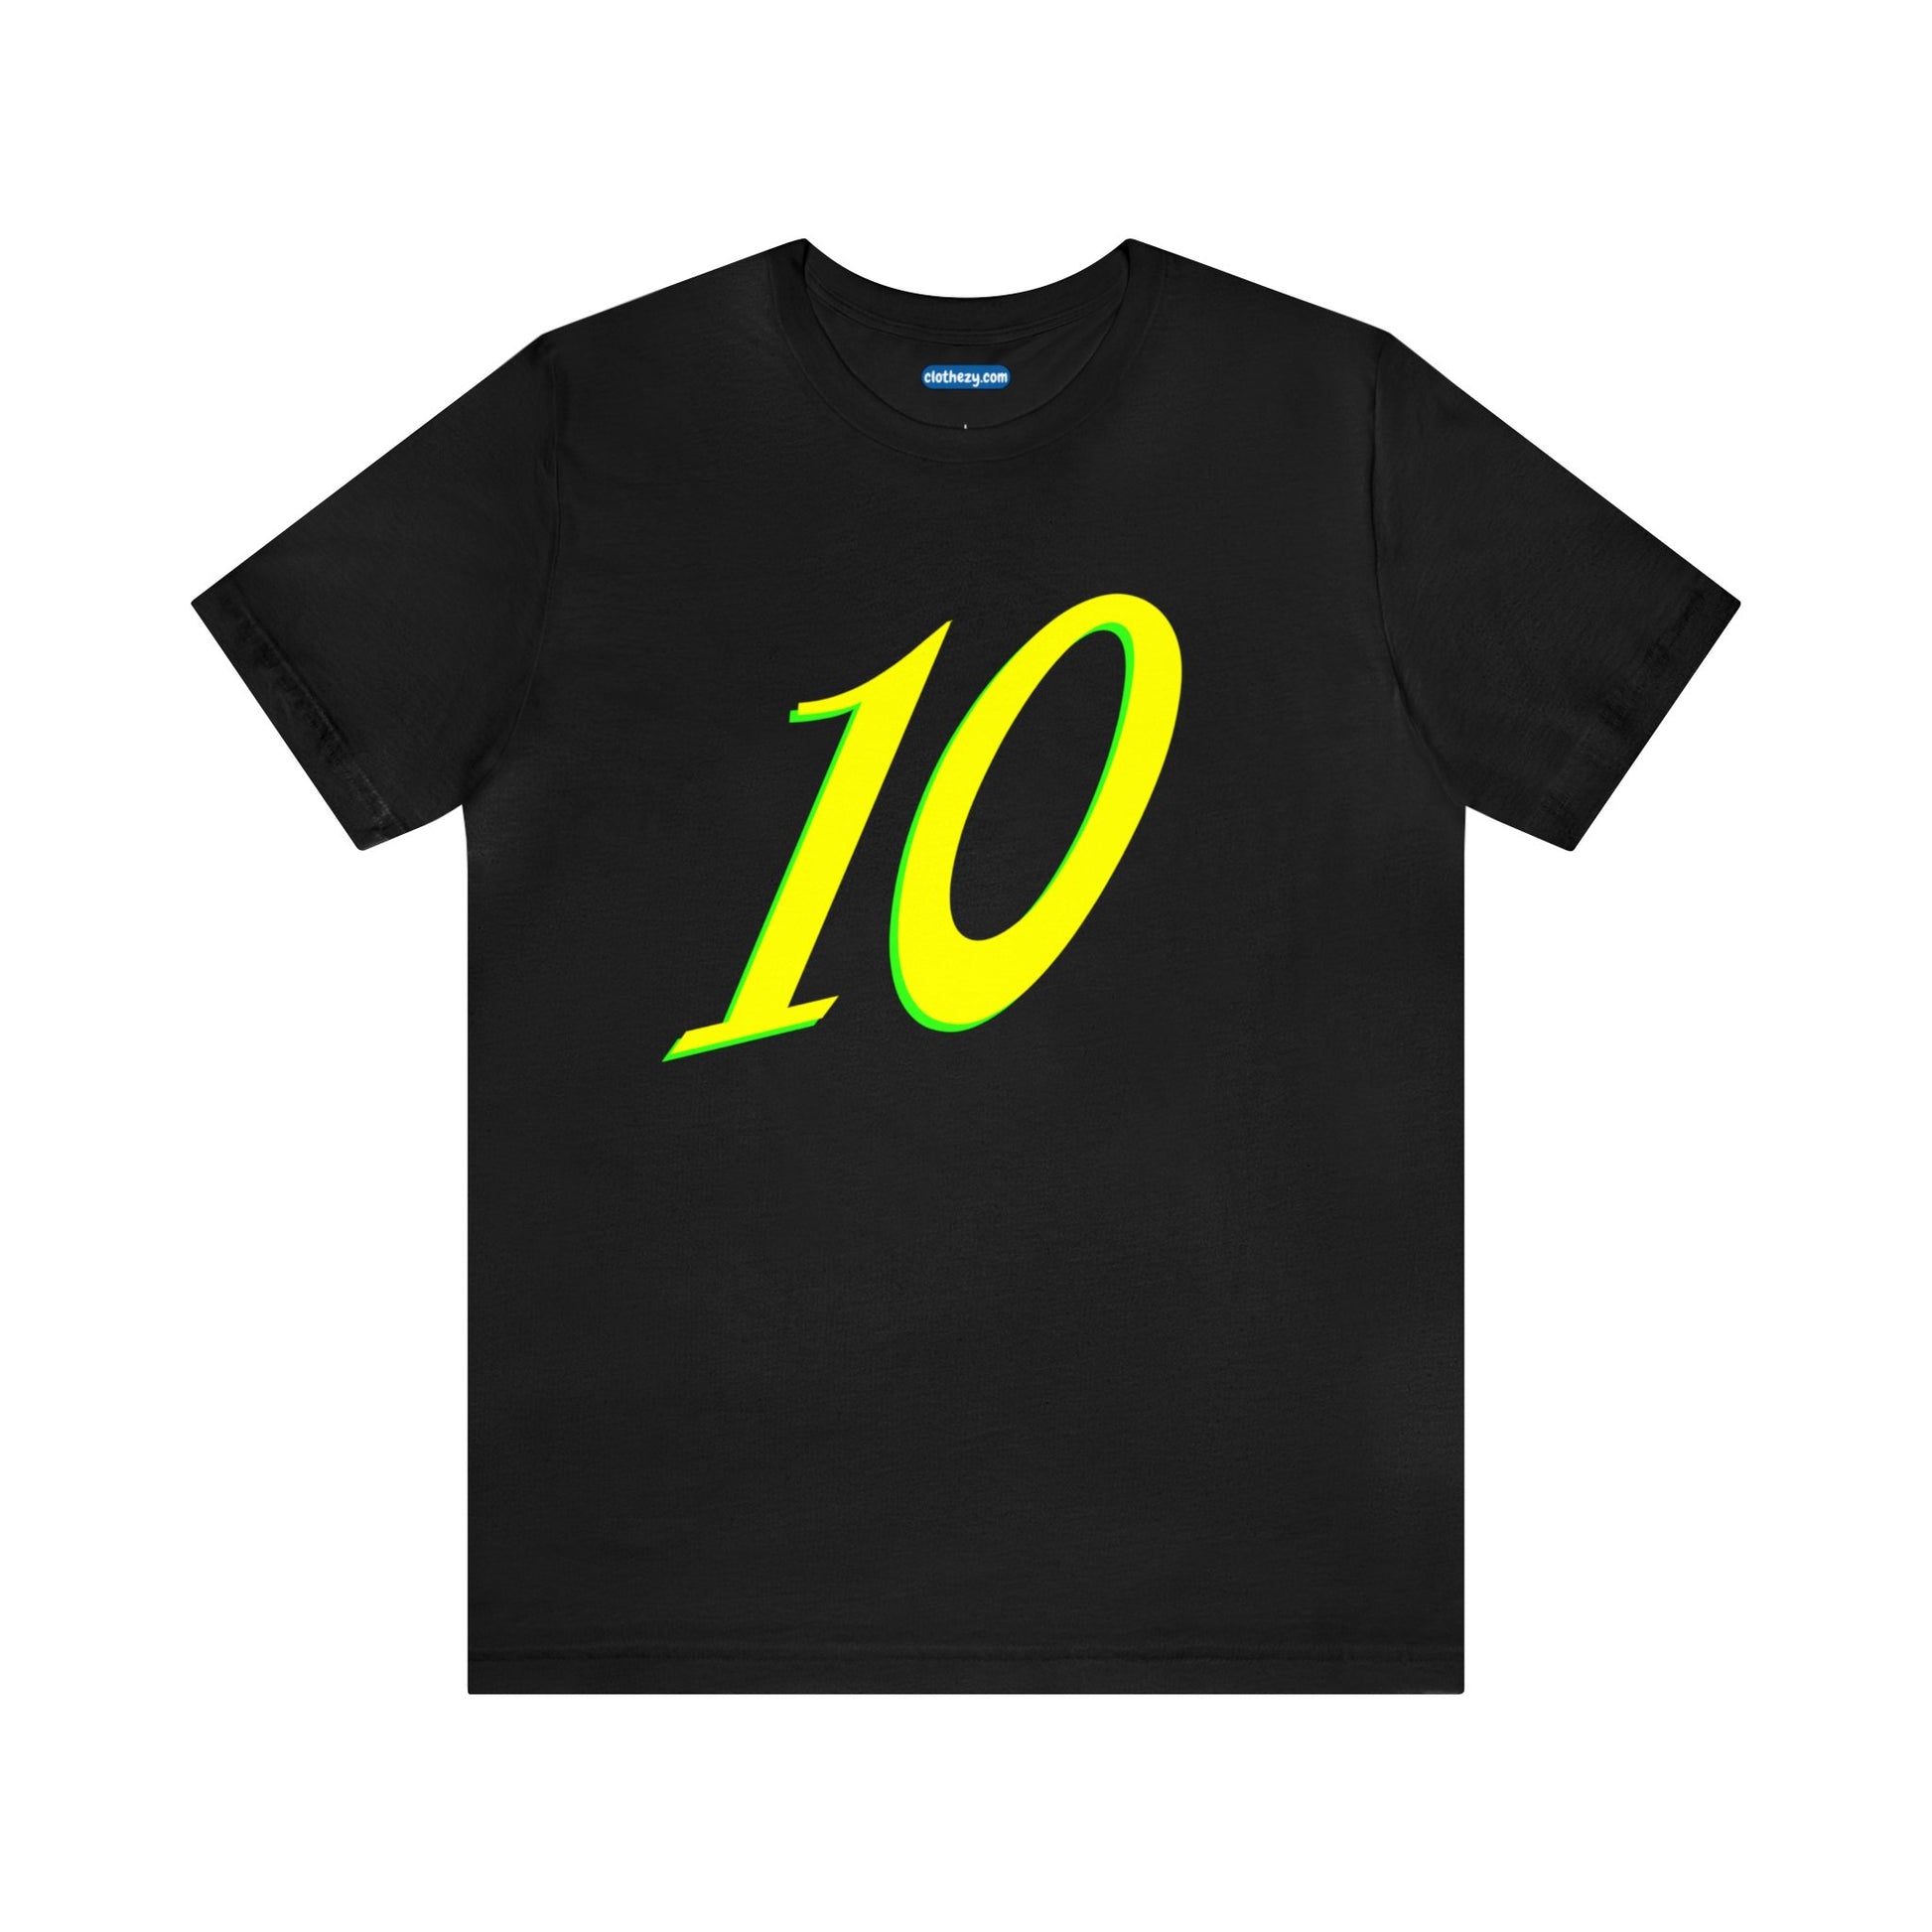 Number 10 Design - Soft Cotton Tee for birthdays and celebrations, Gift for friends and family, Multiple Options by clothezy.com in Black Size Small - Buy Now